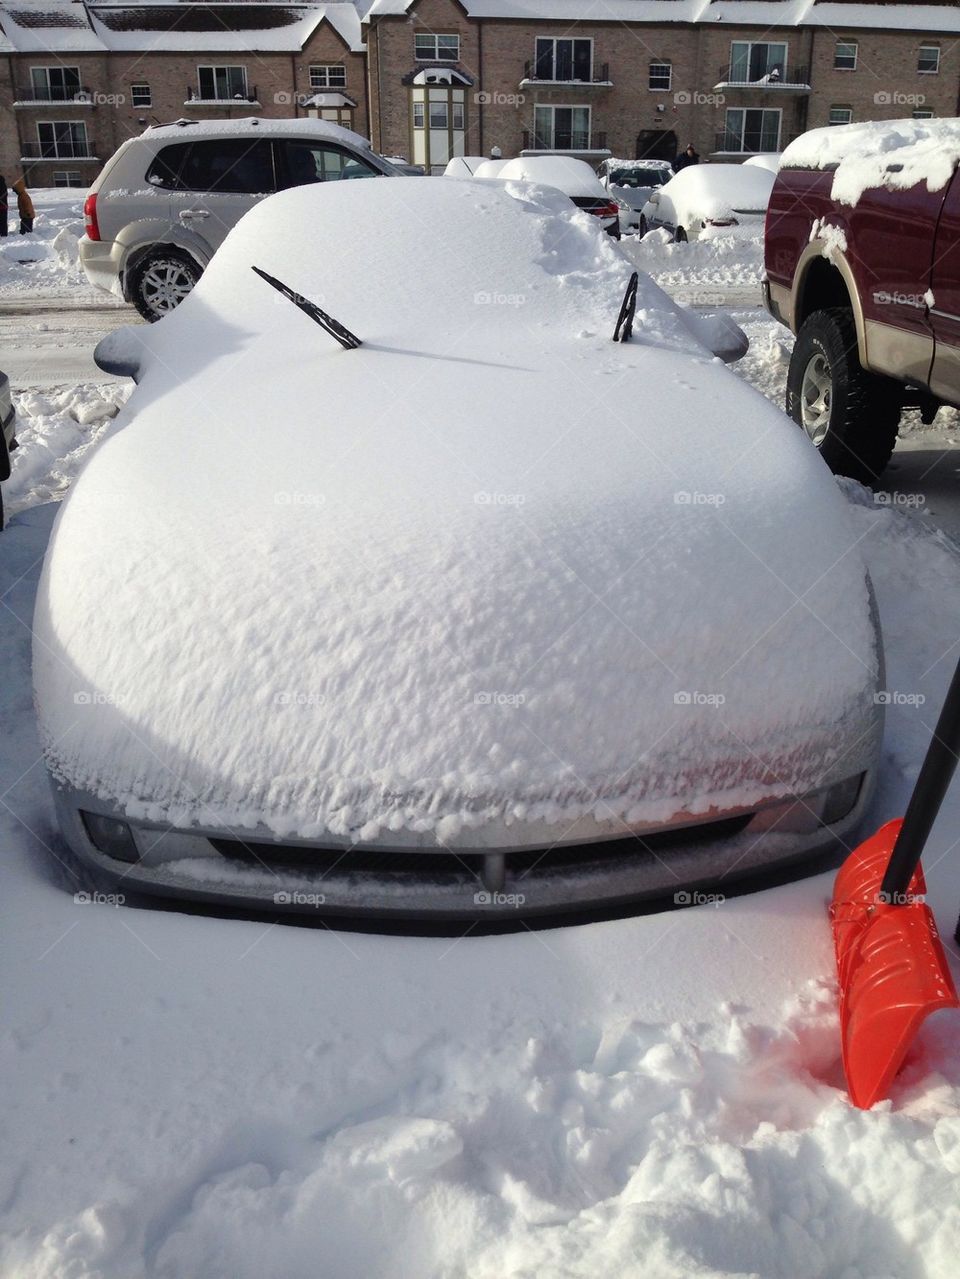 Trouble Driving!. Car after a strong winter storm. A full day of shoveling ahead!